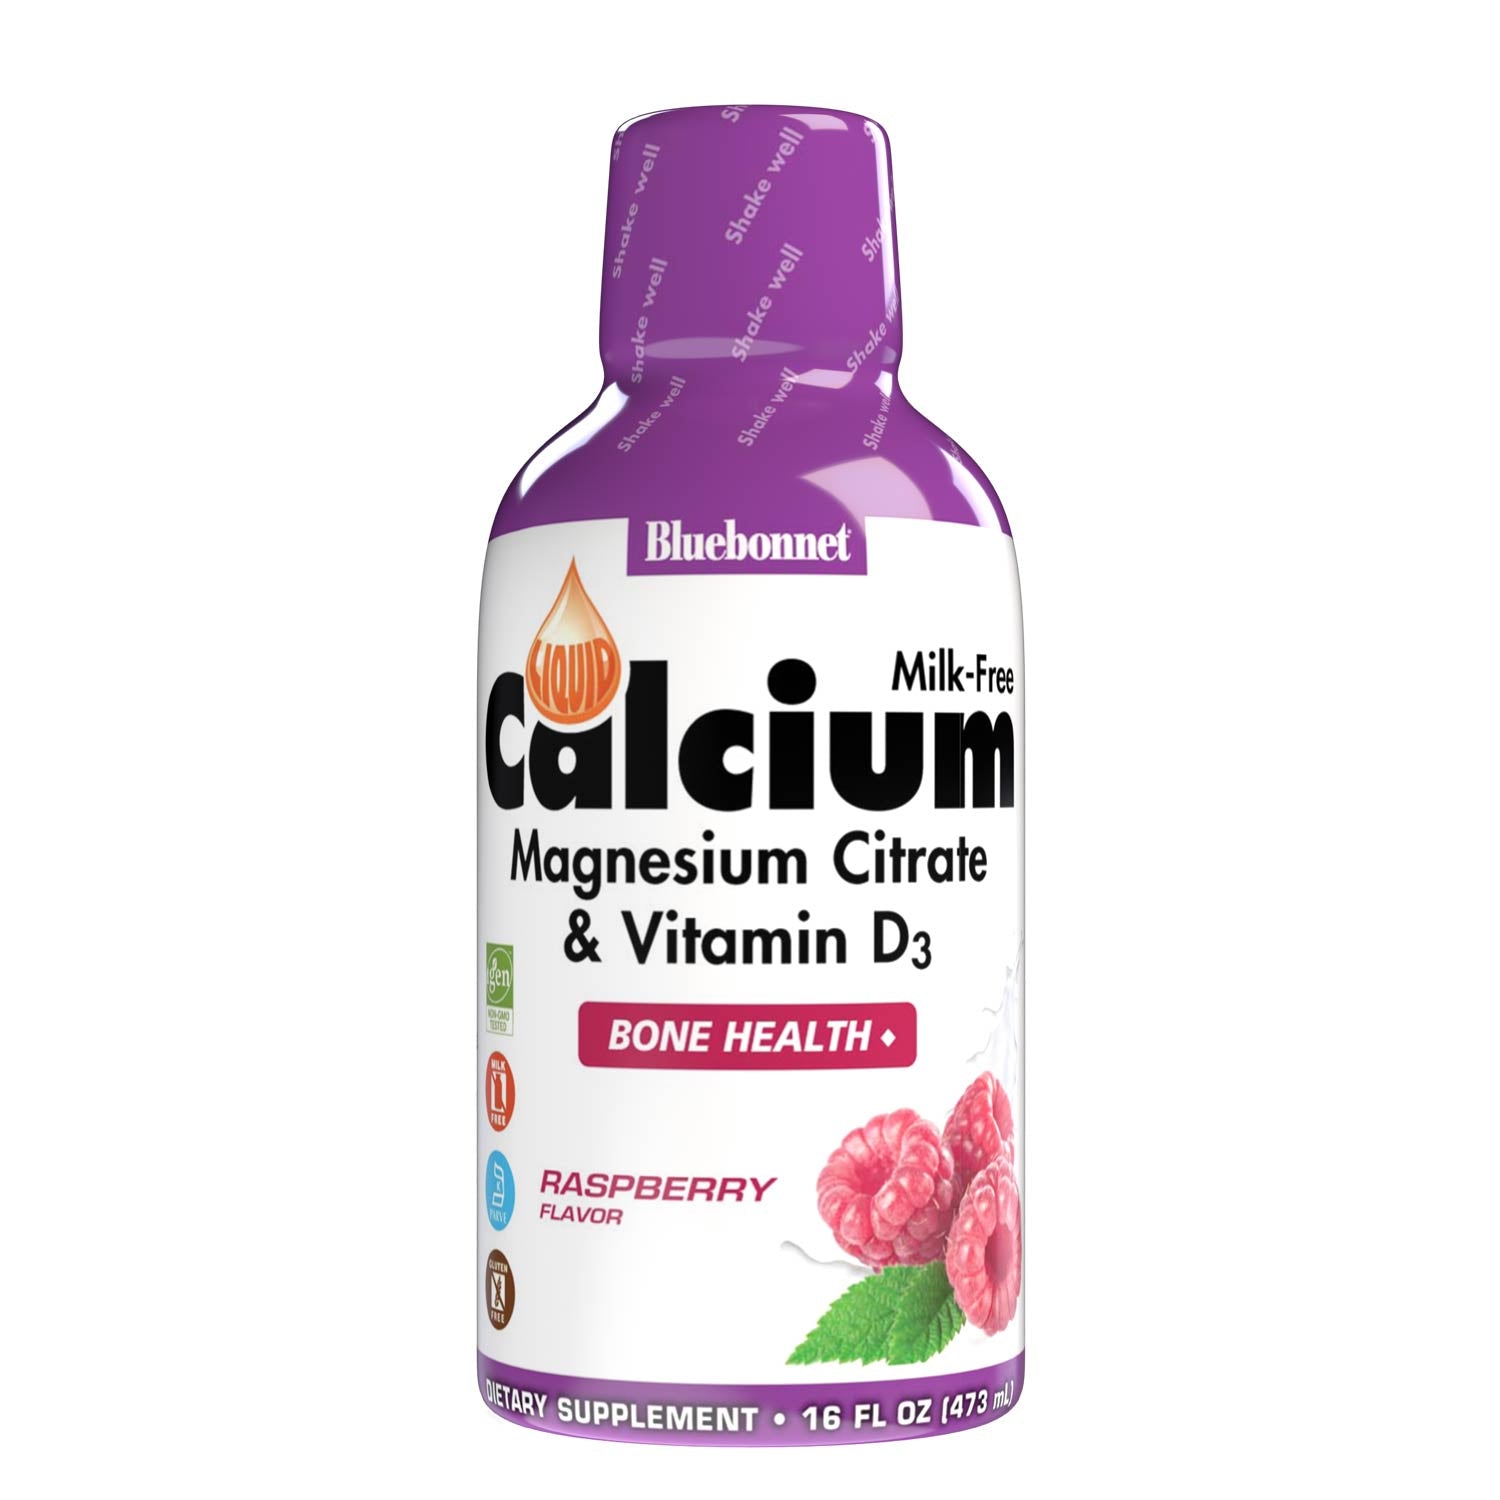 Bluebonnet's Liquid Calcium Magnesium Citrate with Vitamin D3 are formulated with calcium in a chelate of calcium citrate, as well as magnesium in a chelate of magnesium citrate and magnesium aspartate in a delicious raspberry flavor. Plus, this formula are formulated with vitamin D3 (cholecalciferol) from lanolin for strong healthy bones. #flavor_raspberry